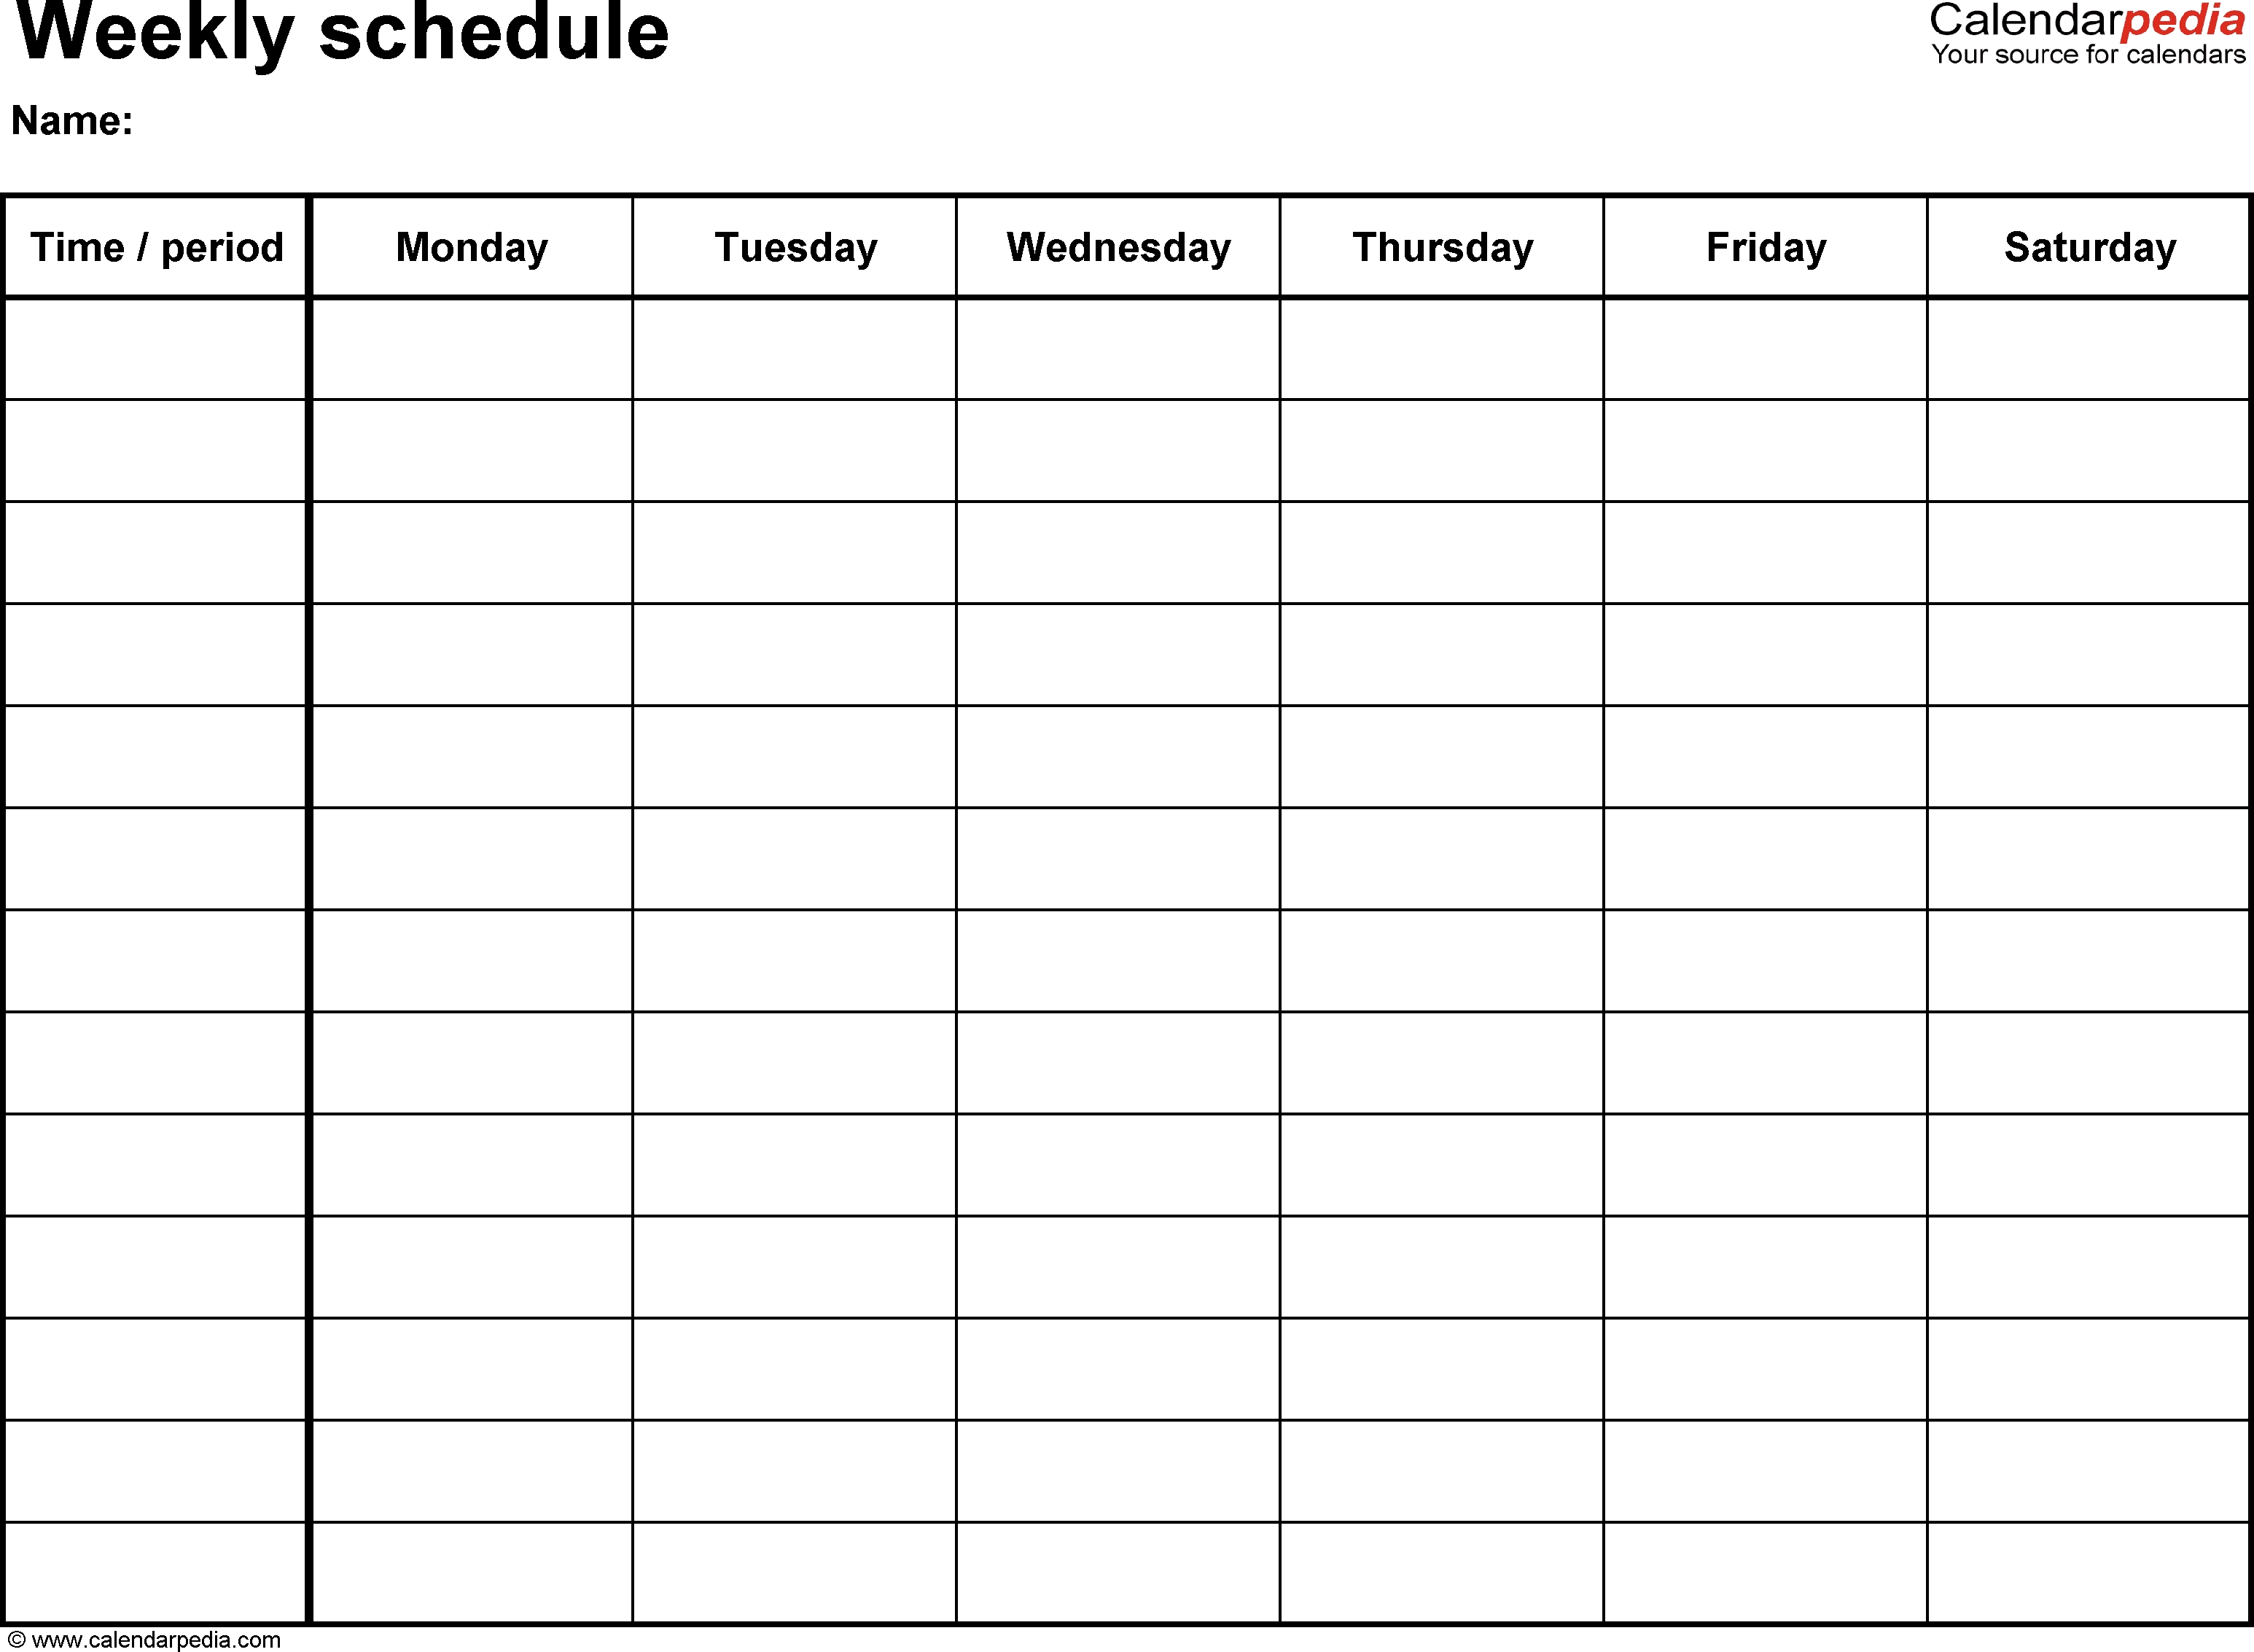 Free Weekly Schedule Templates For Word - 18 Templates with regard to Calendar Template Monday To Sunday